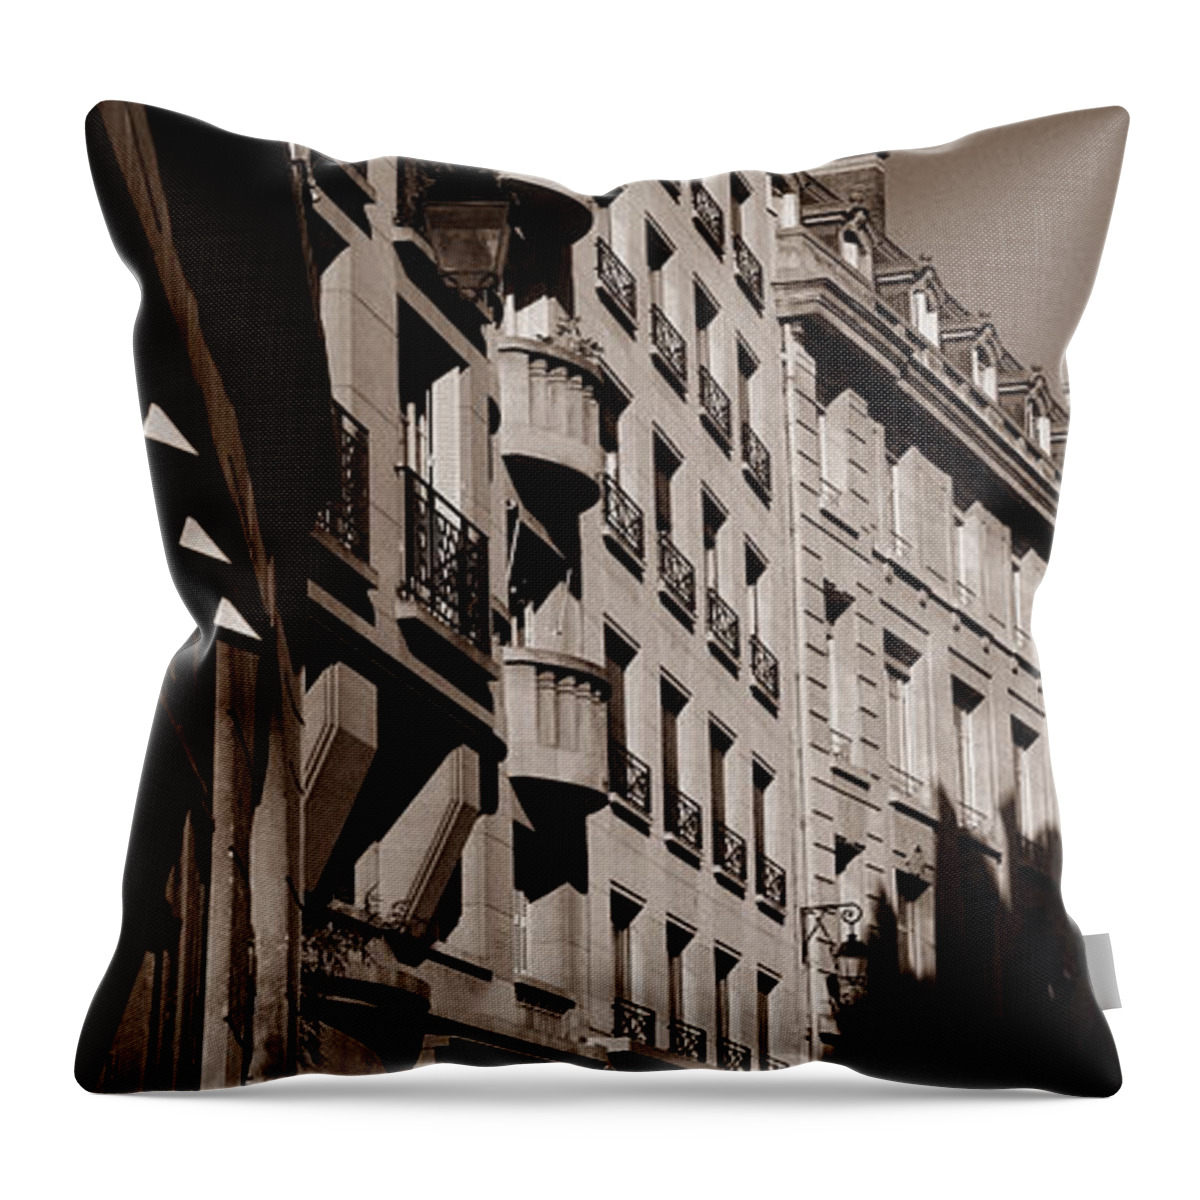 Paris Streets Throw Pillow featuring the photograph Paris Streets 1 by Andrew Fare